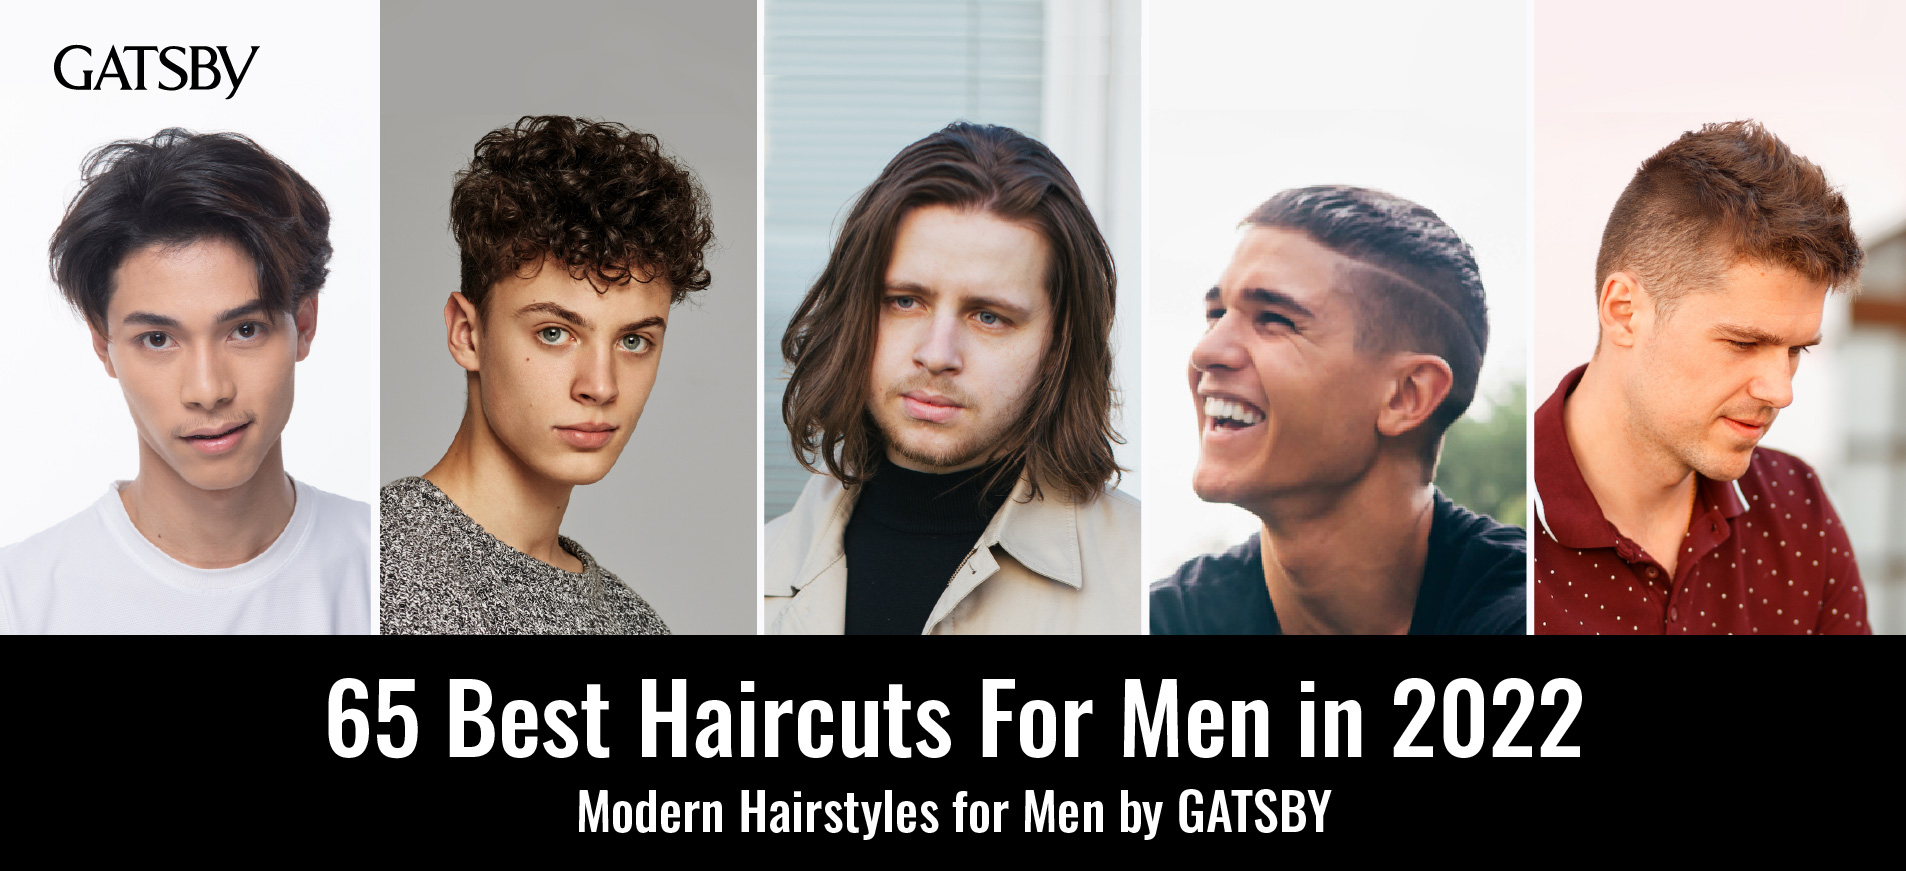 45 Best Men's Hairstyles & Types Evolved from 1975 to 2023